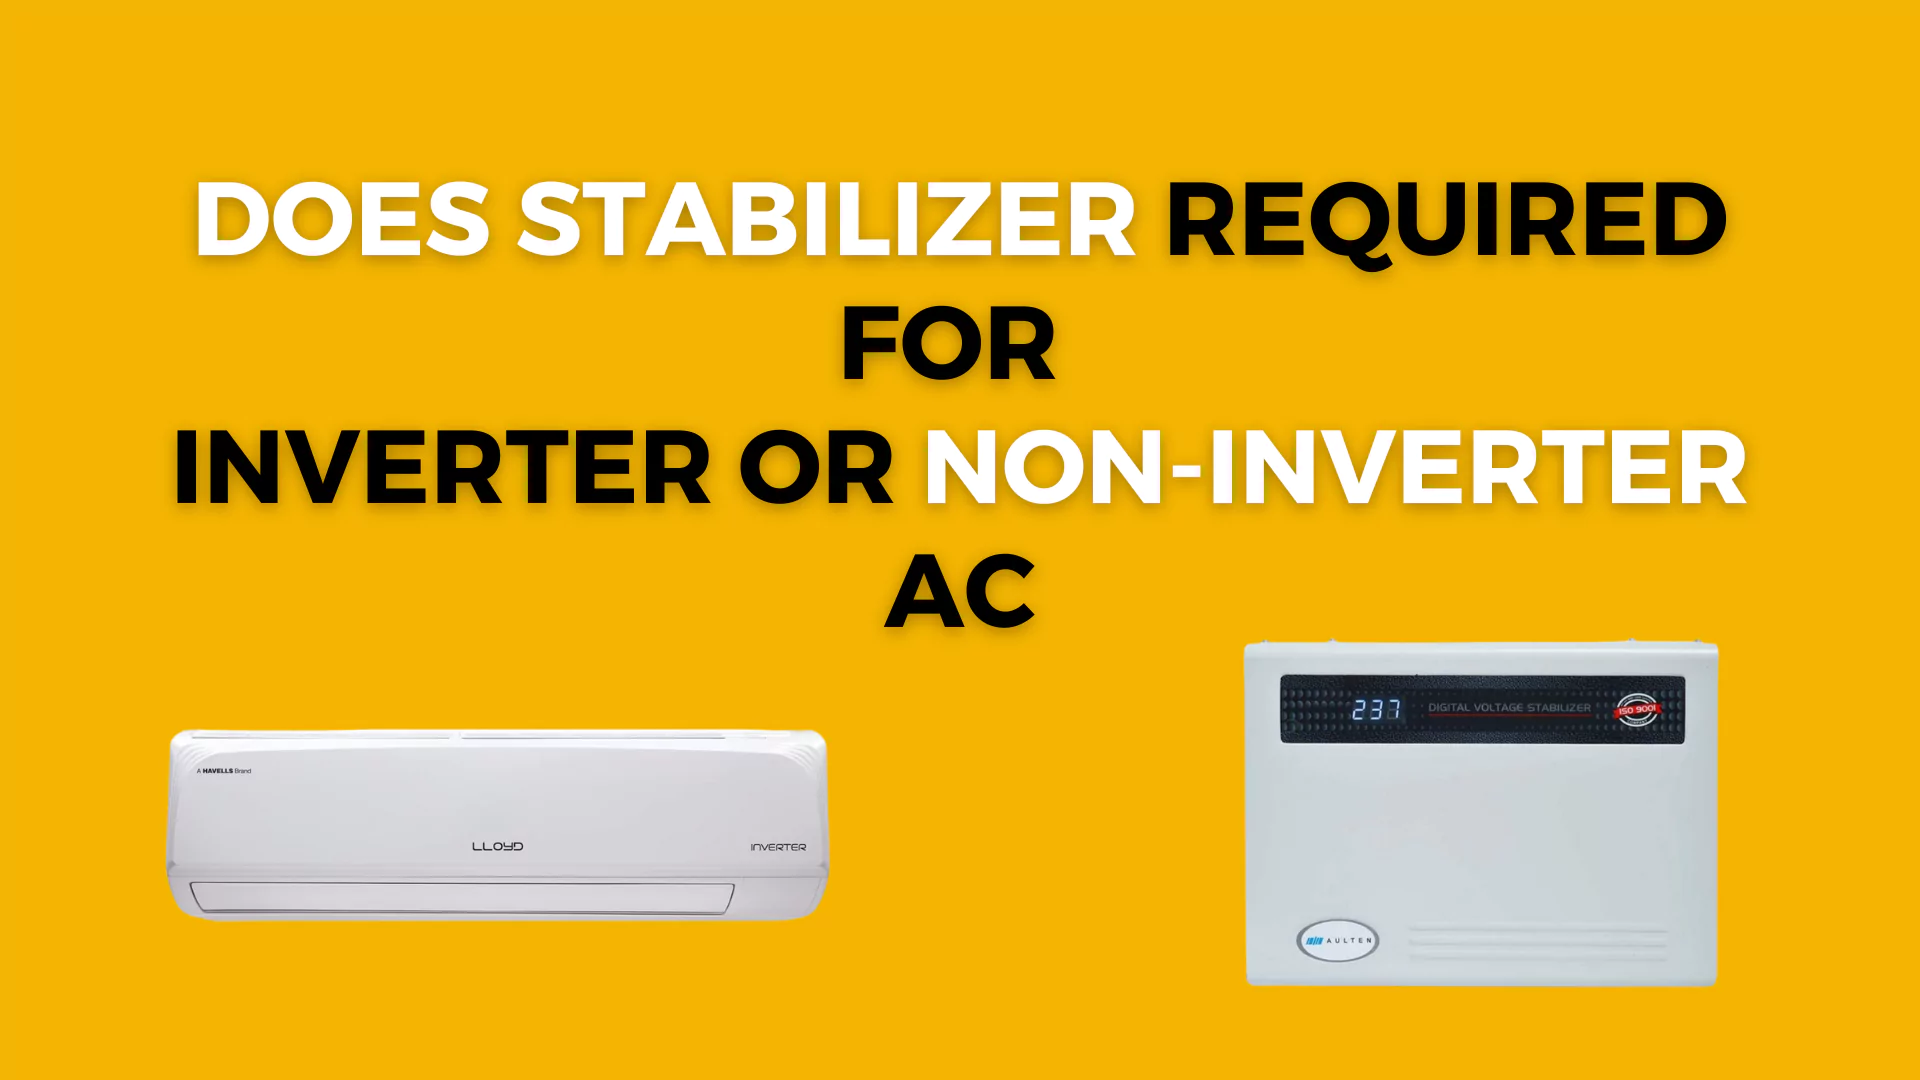 Does Stabilizer Required For Inverter or Non-Inverter AC